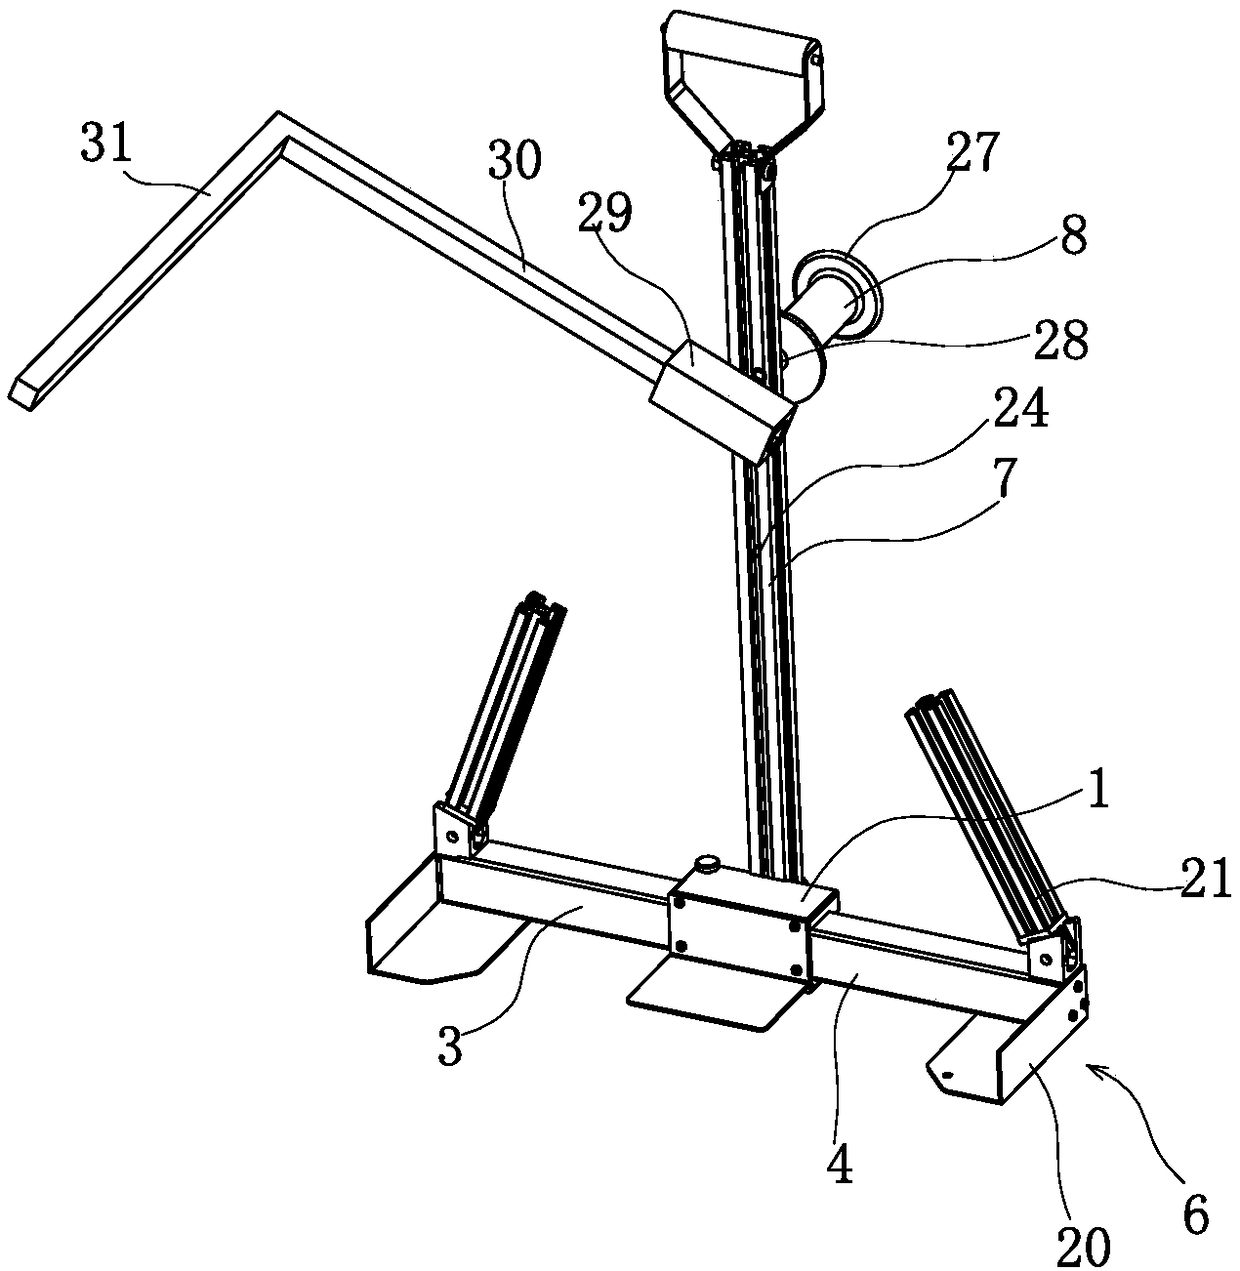 Box carrying and stair climbing assisting device